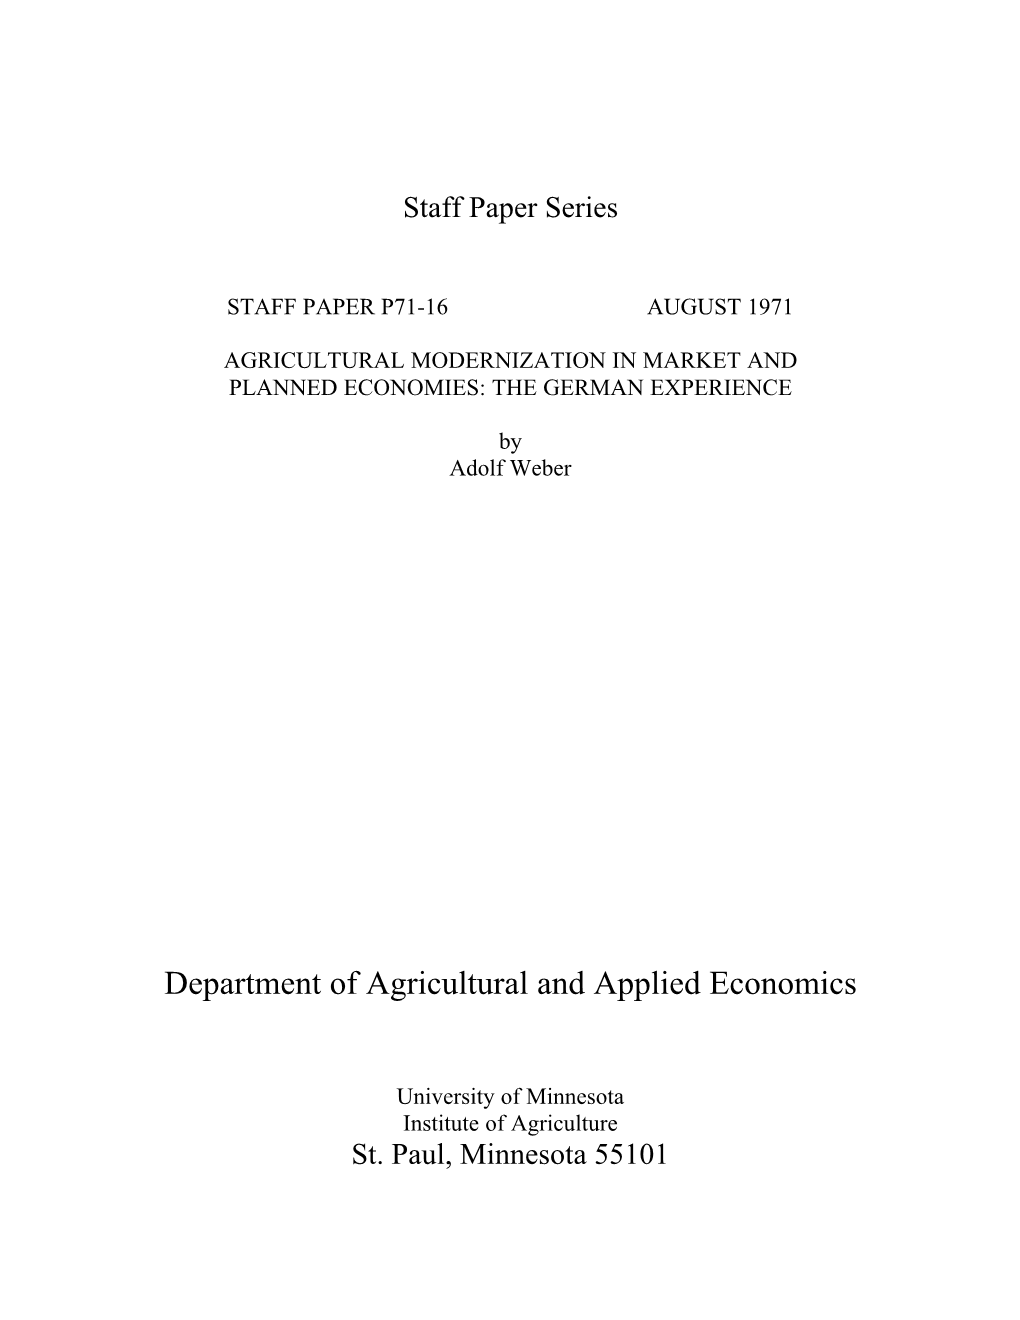 Agricultural Modernization in Market and Planned Economies: the German Experience